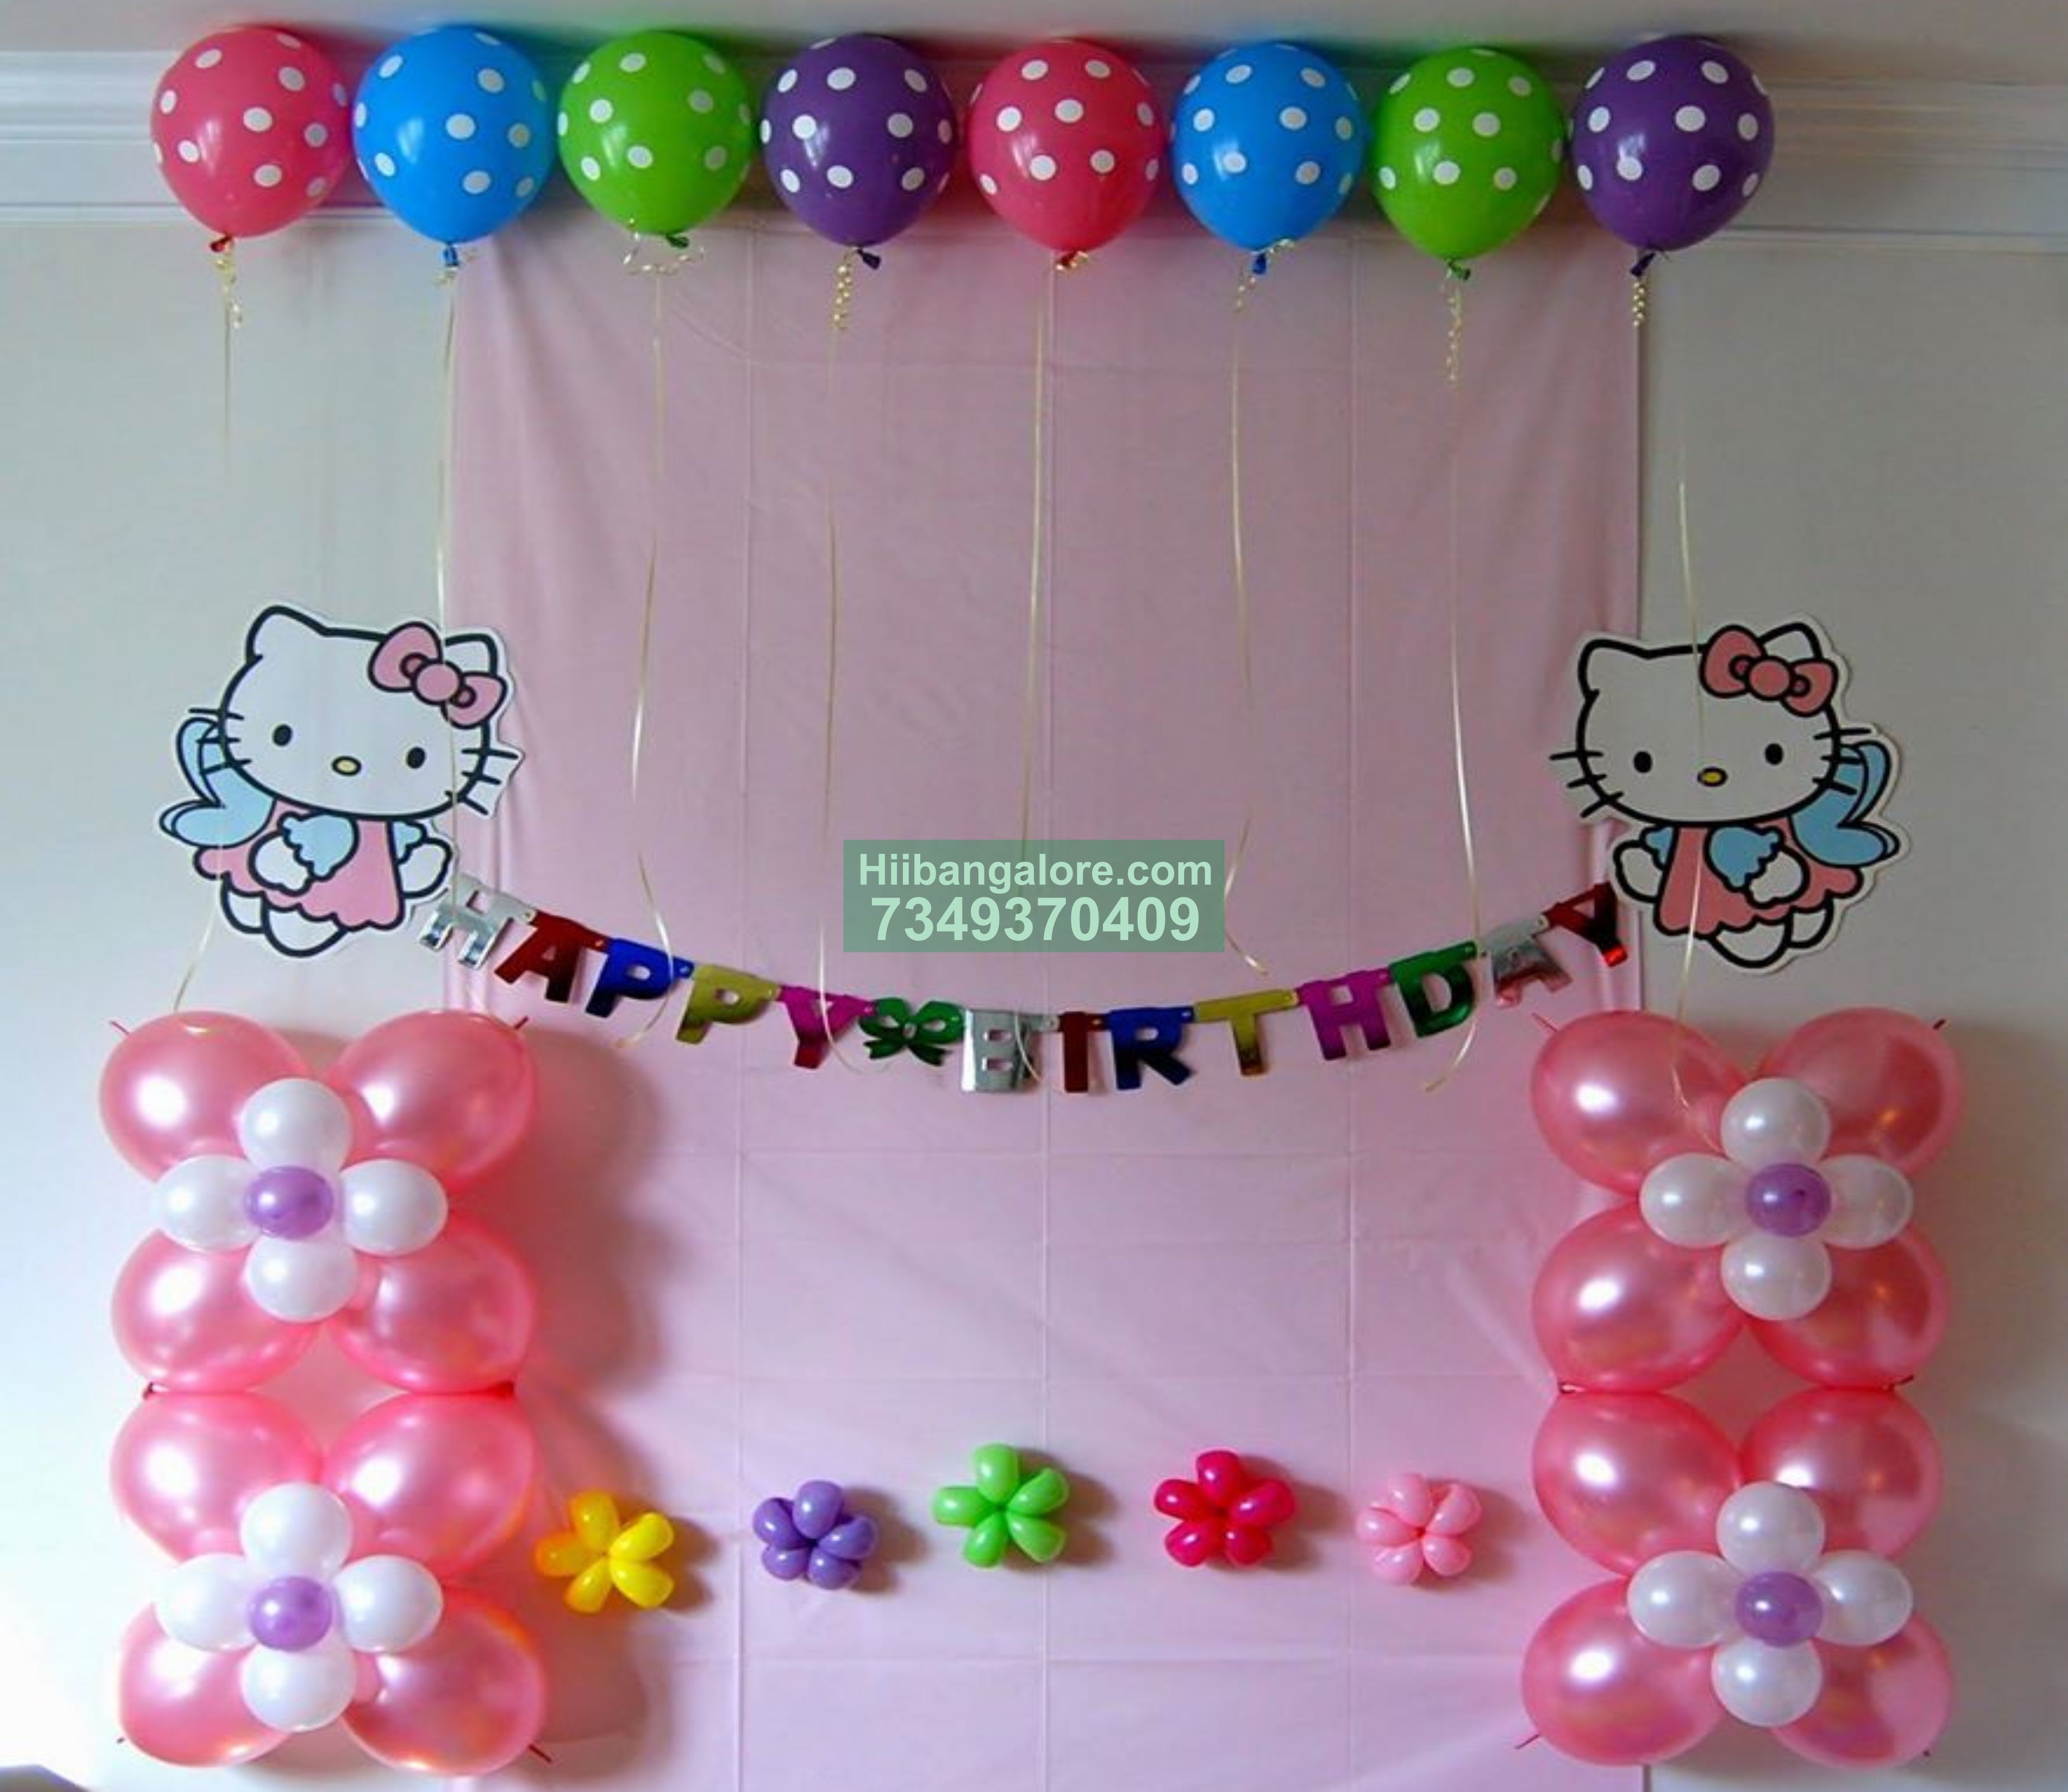 simple hello kitty balloon decor at home - Catering services ...